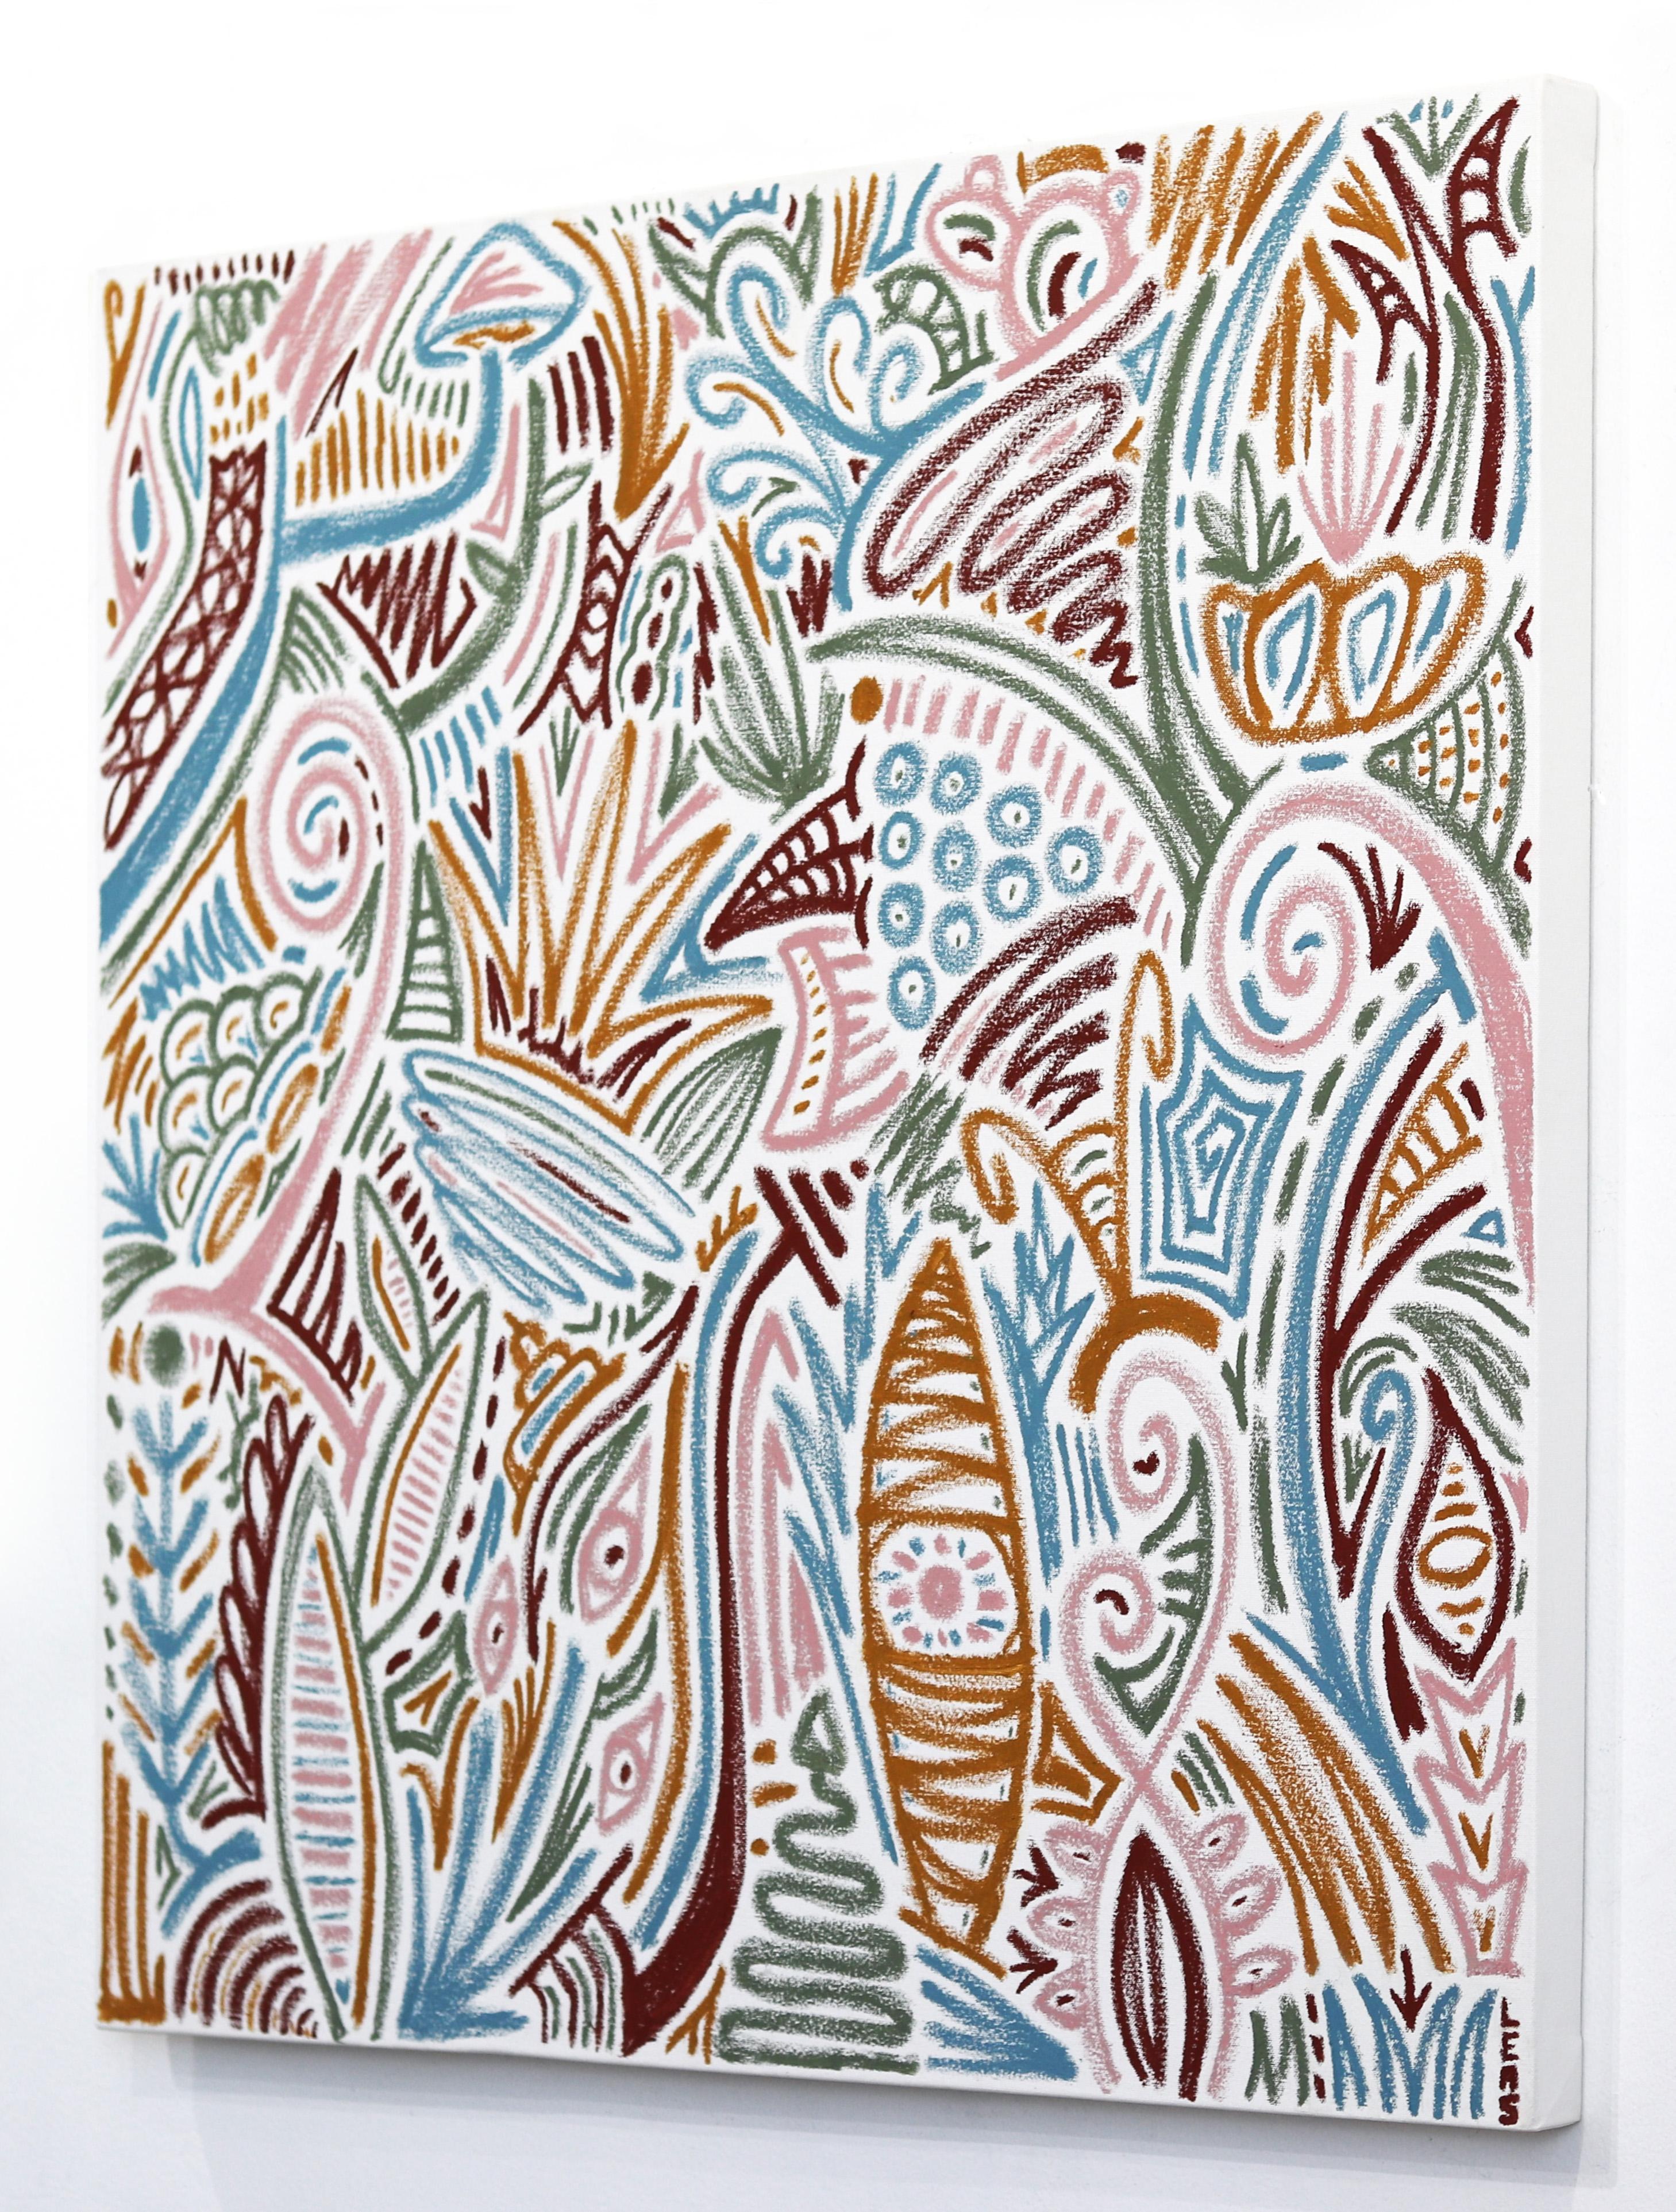 Ilan Leas uses graffiti-like strokes and bold angles to converge creating an intriguing balance of organized chaos in his drawings. His dynamic linear design compositions are aboriginal inspired paintings with a unique artistic approach. Leas draws